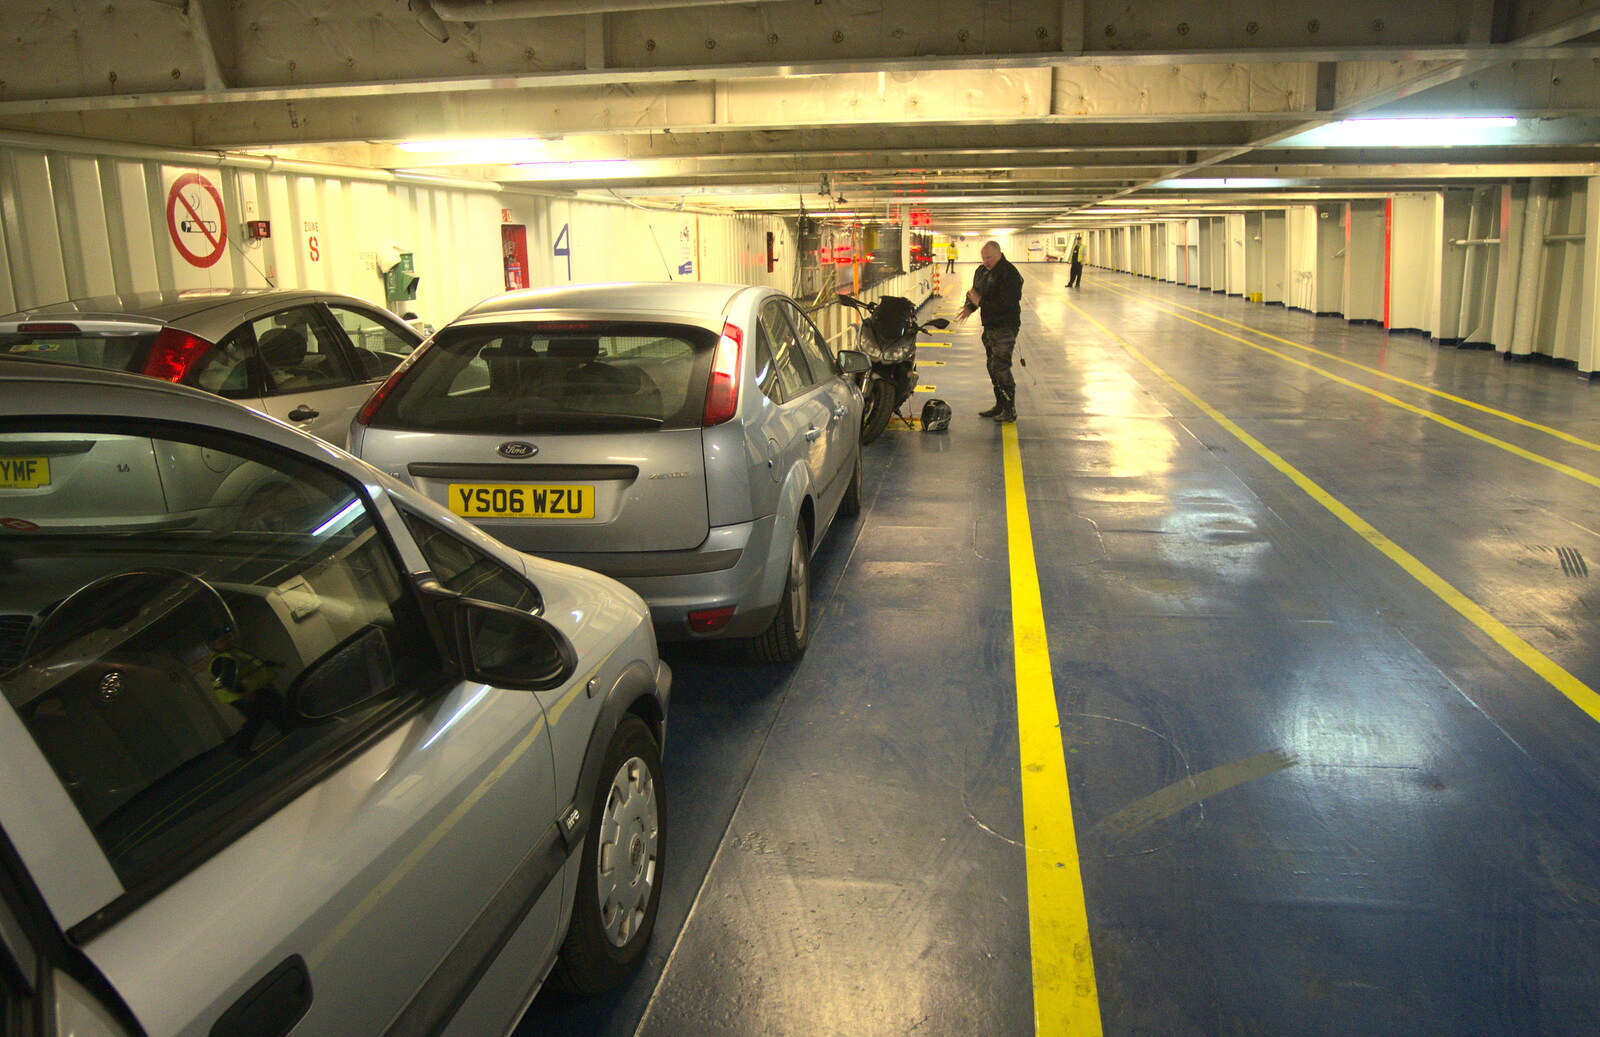 We're almost first in on the car deck from Conwy, Holyhead and the Ferry to Ireland - 21st December 2015